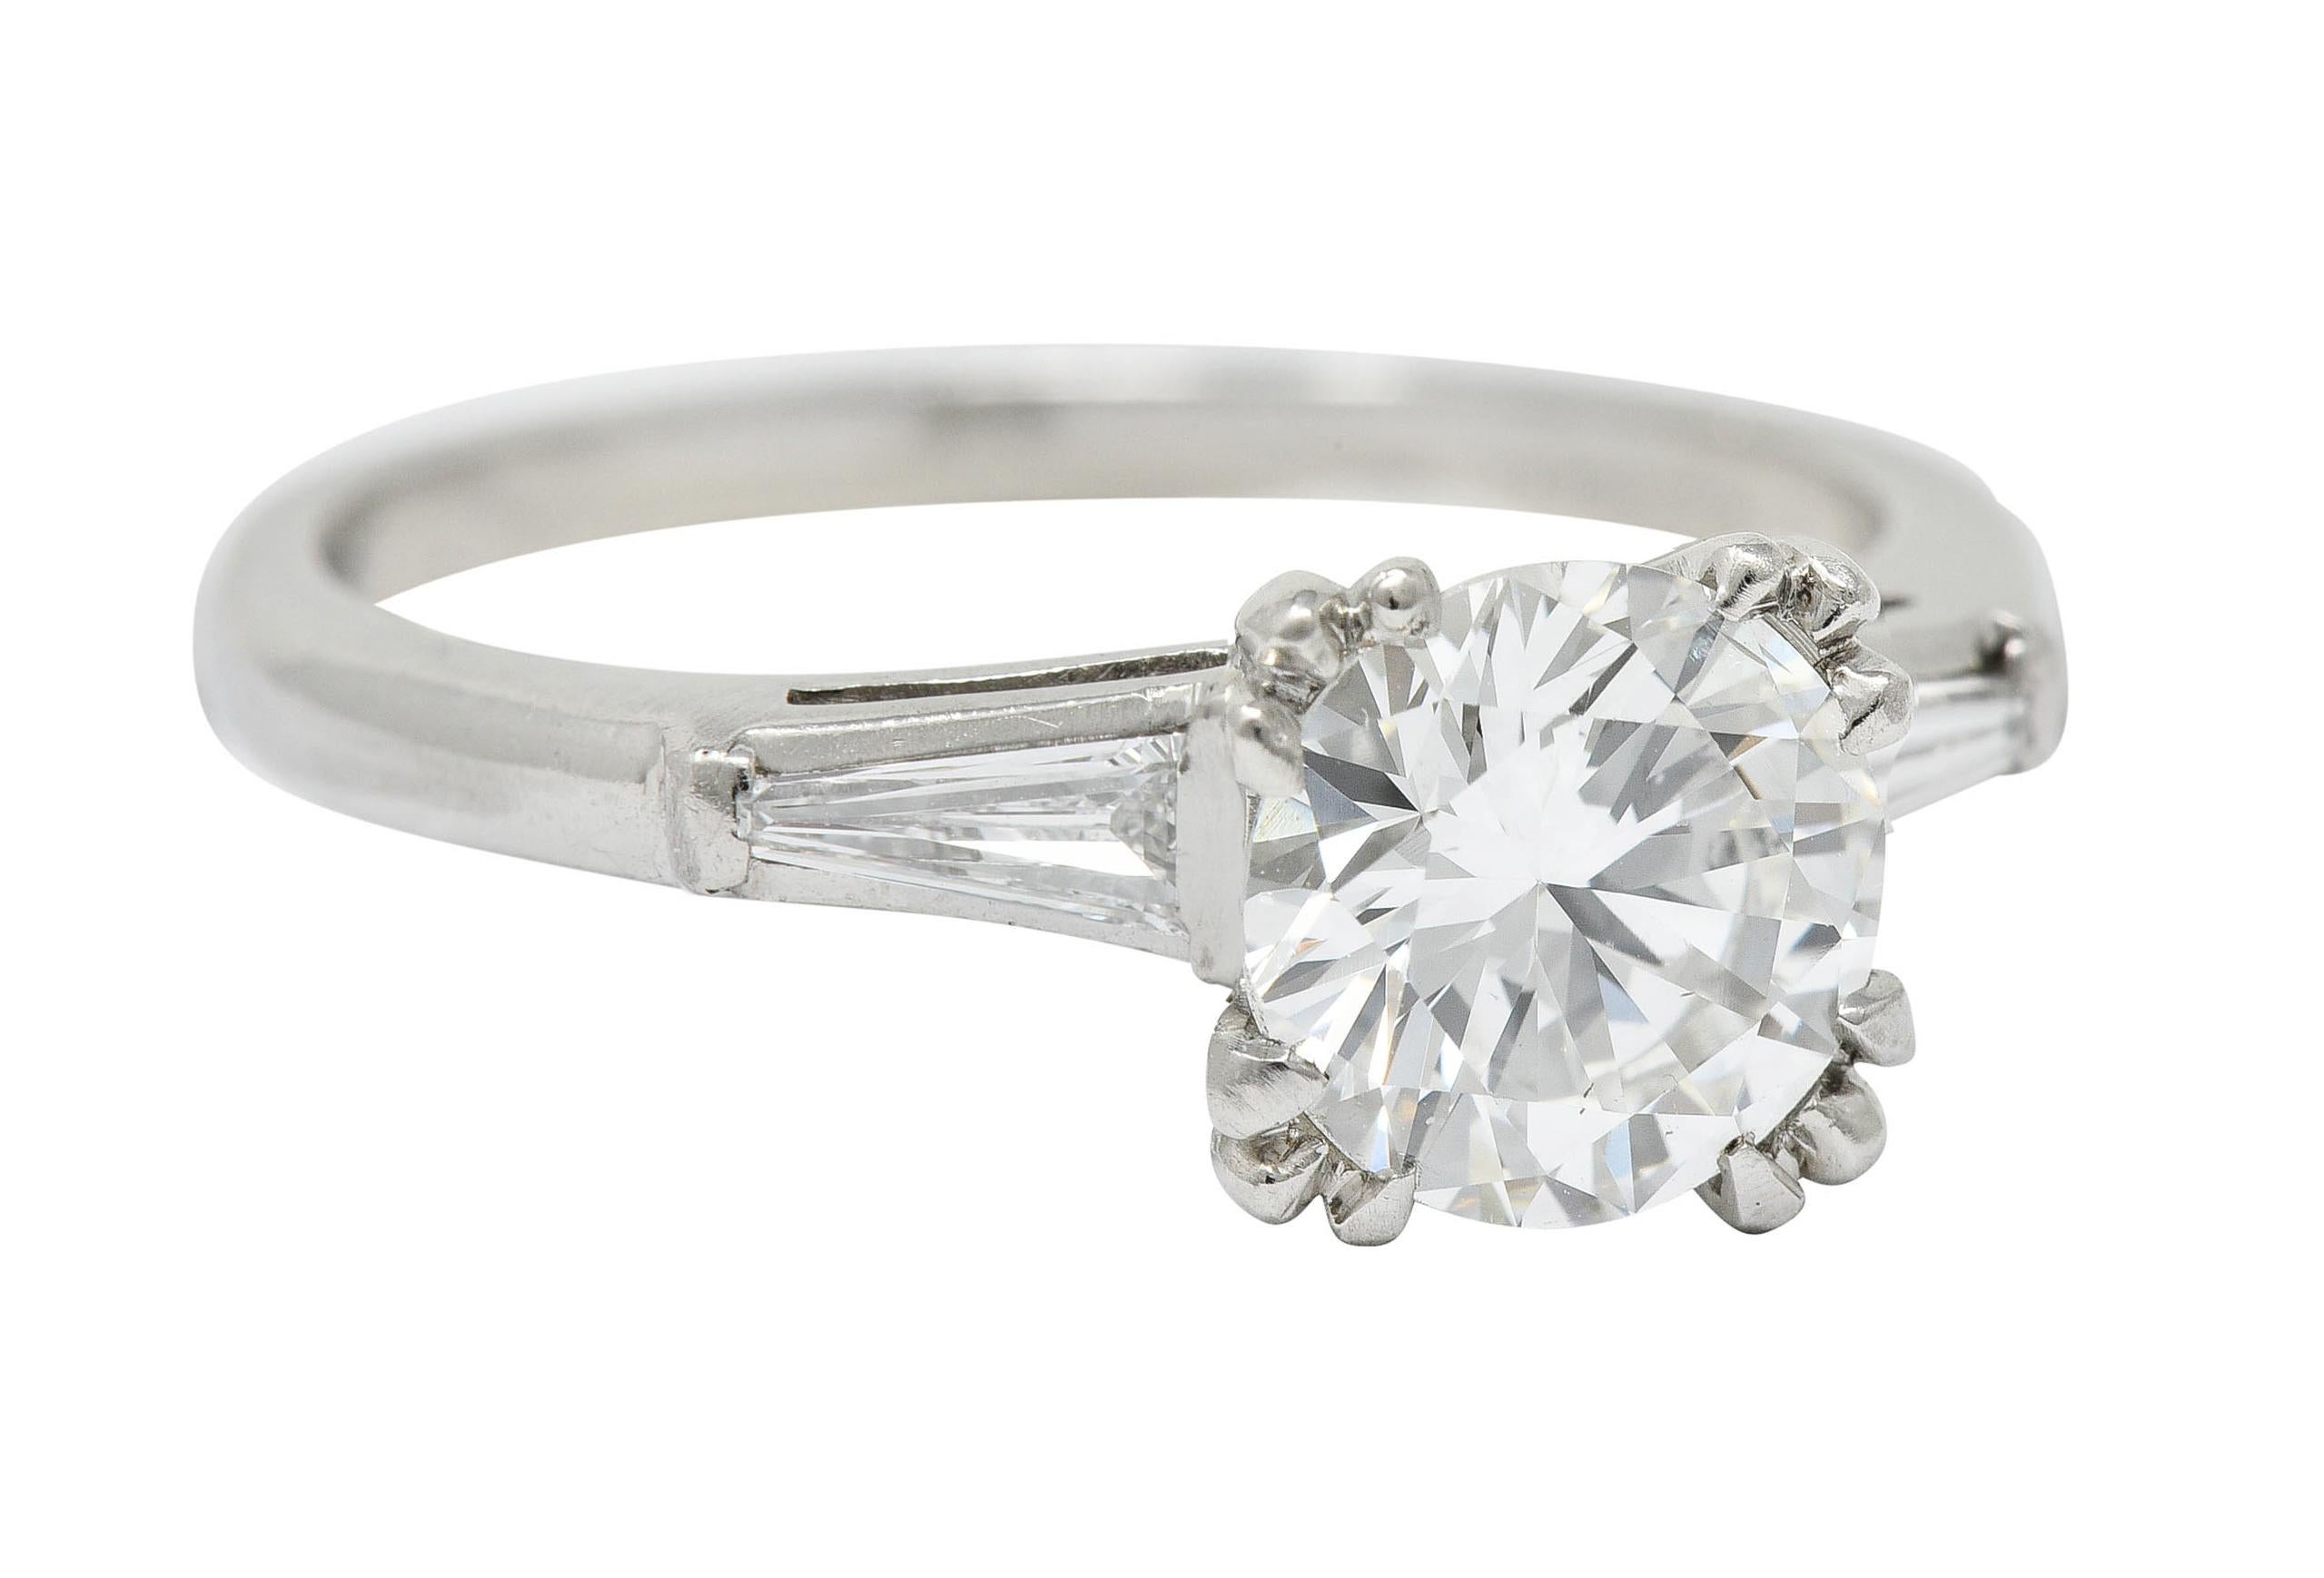 Centering a round brilliant cut diamond weighing 1.18 carat - F color with SI2 clarity

Set by tri-split talon prongs in a stylized square form head

Flanked by bar set tapered baguette cut diamonds weighing in total approximately 0.22 carat -